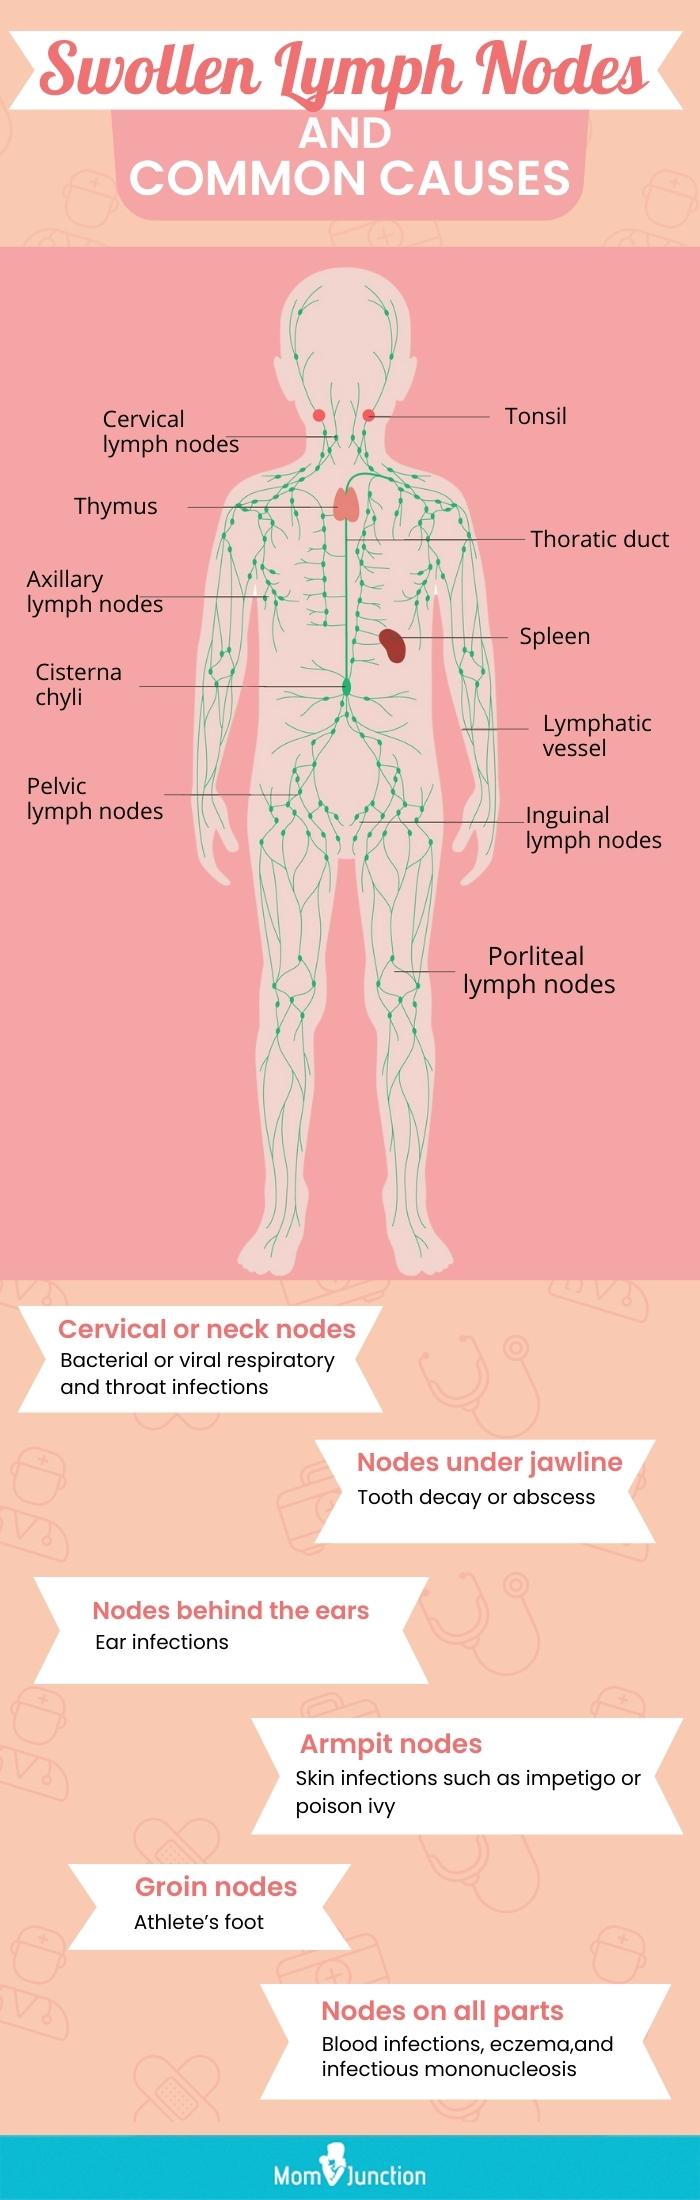 swollen lymph nodes and common causes (infographic)